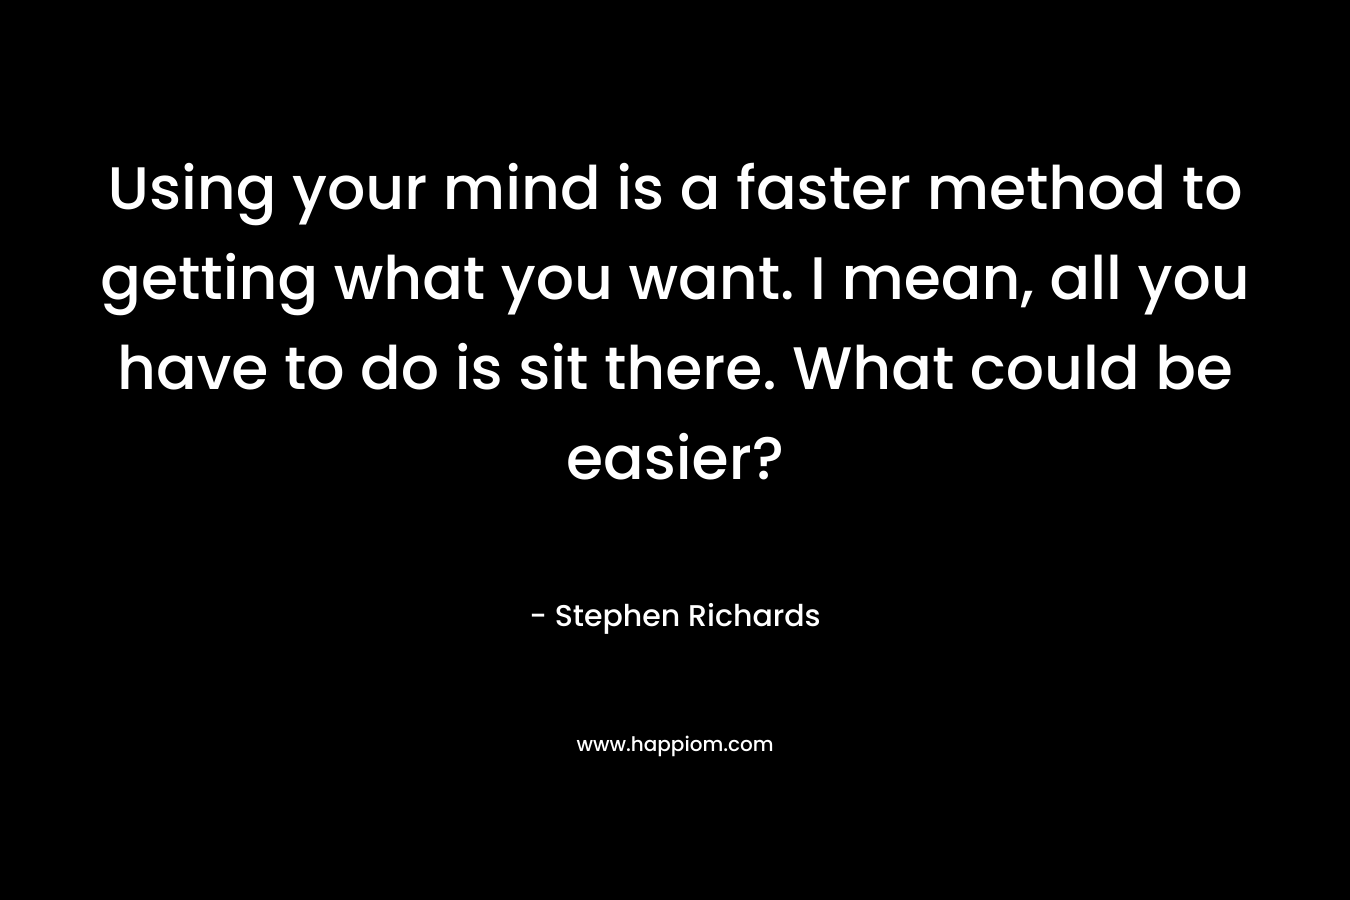 Using your mind is a faster method to getting what you want. I mean, all you have to do is sit there. What could be easier?